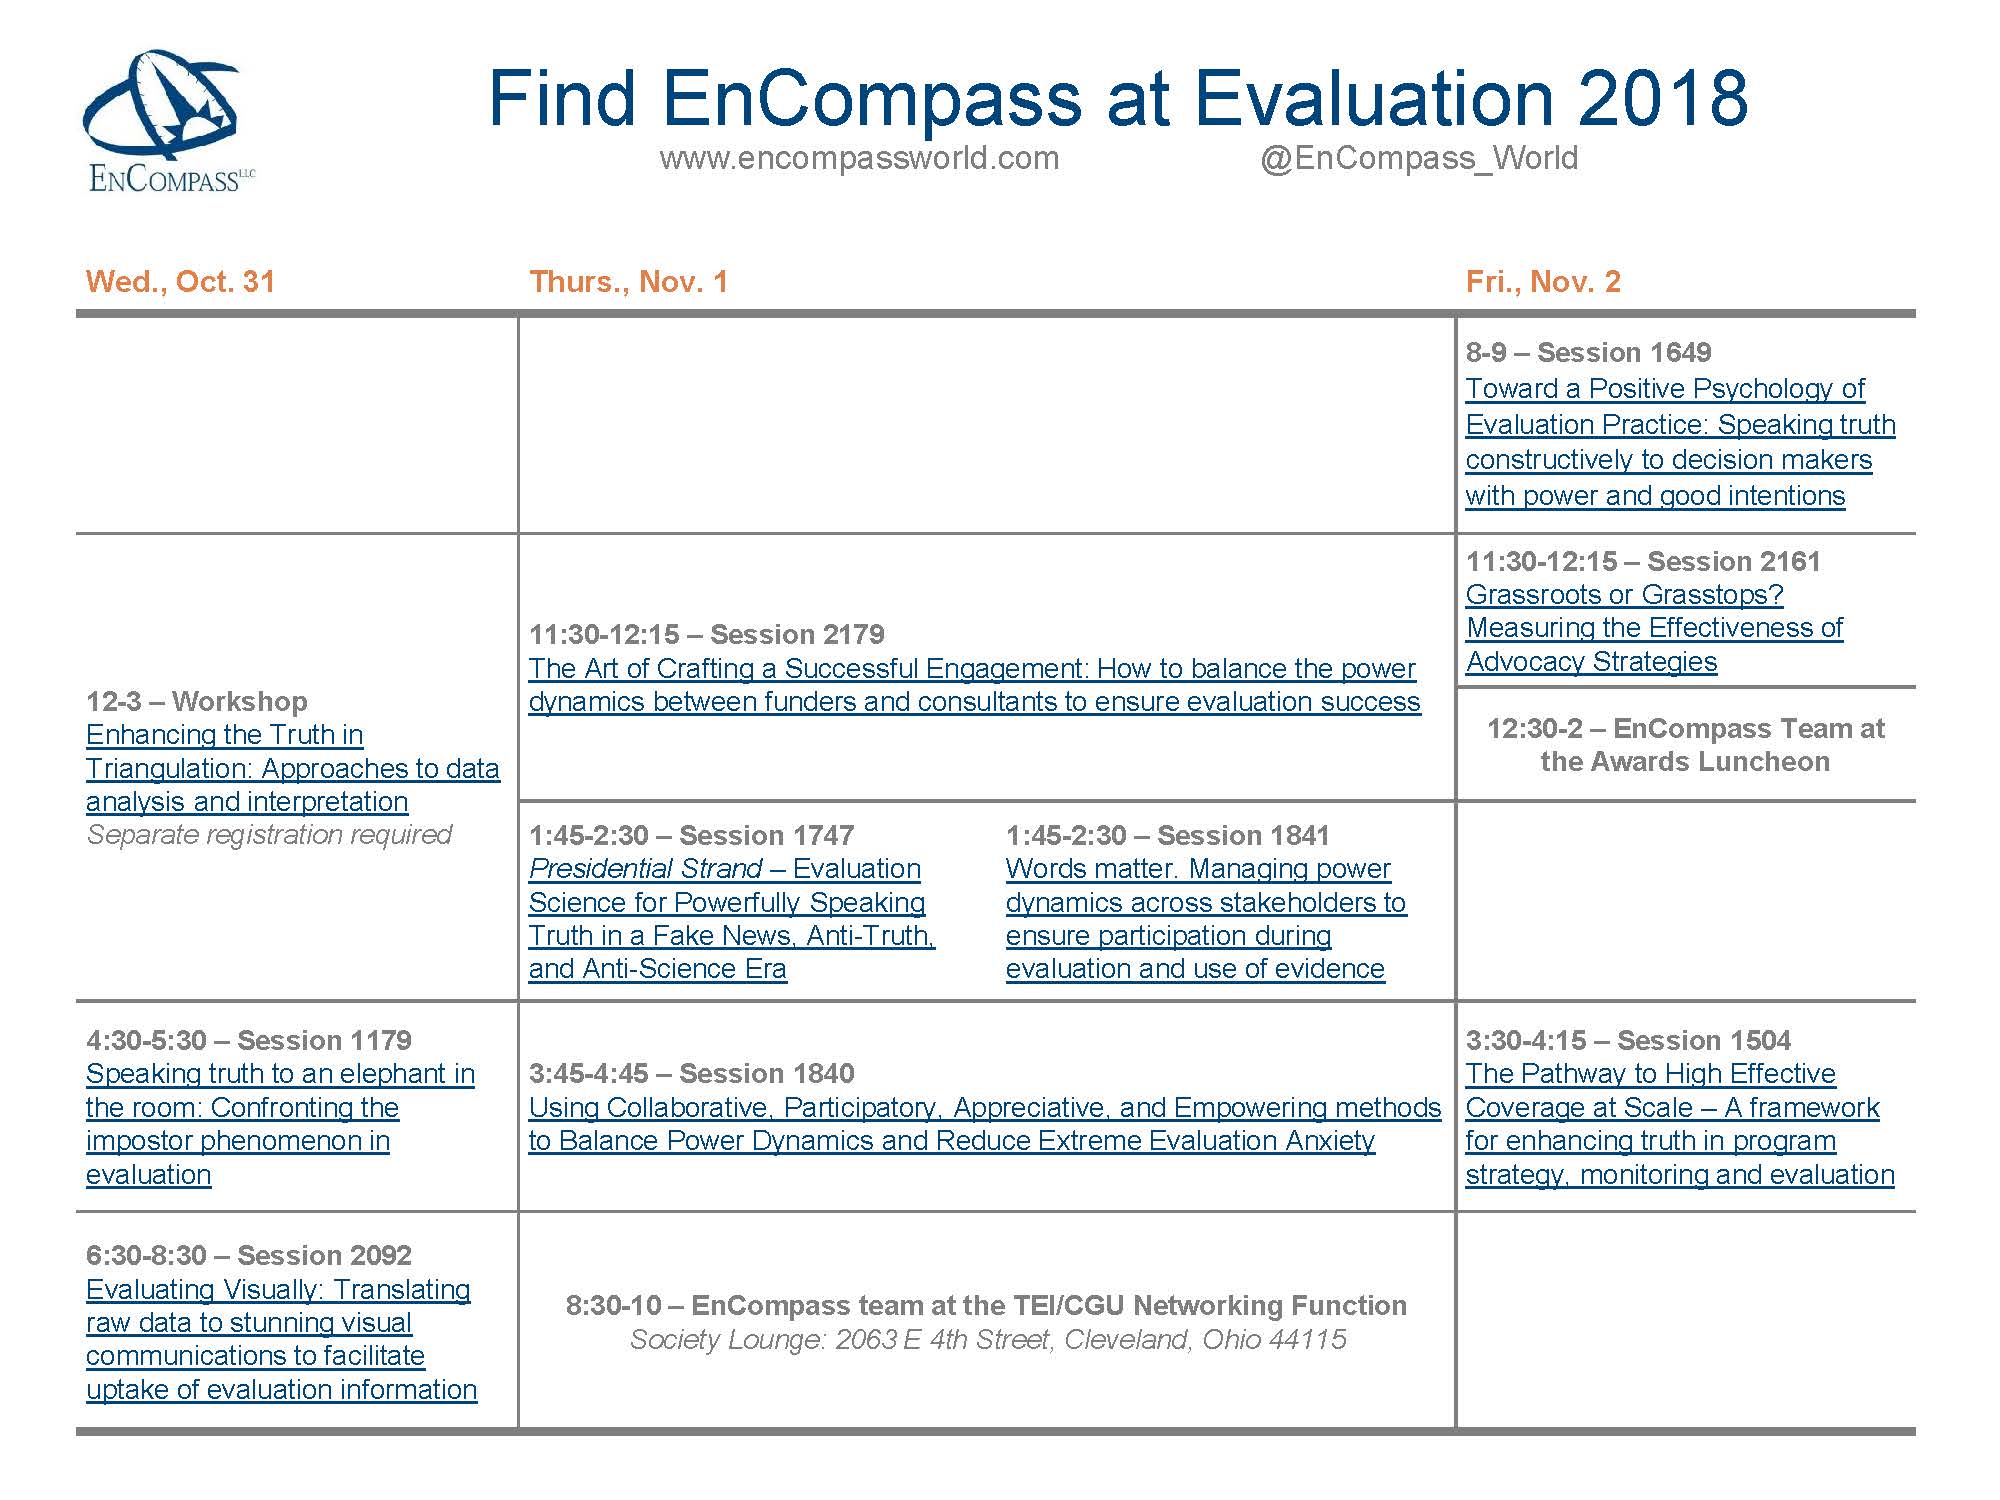 Click here for a PDF, searchable version of the EnCompass schedule